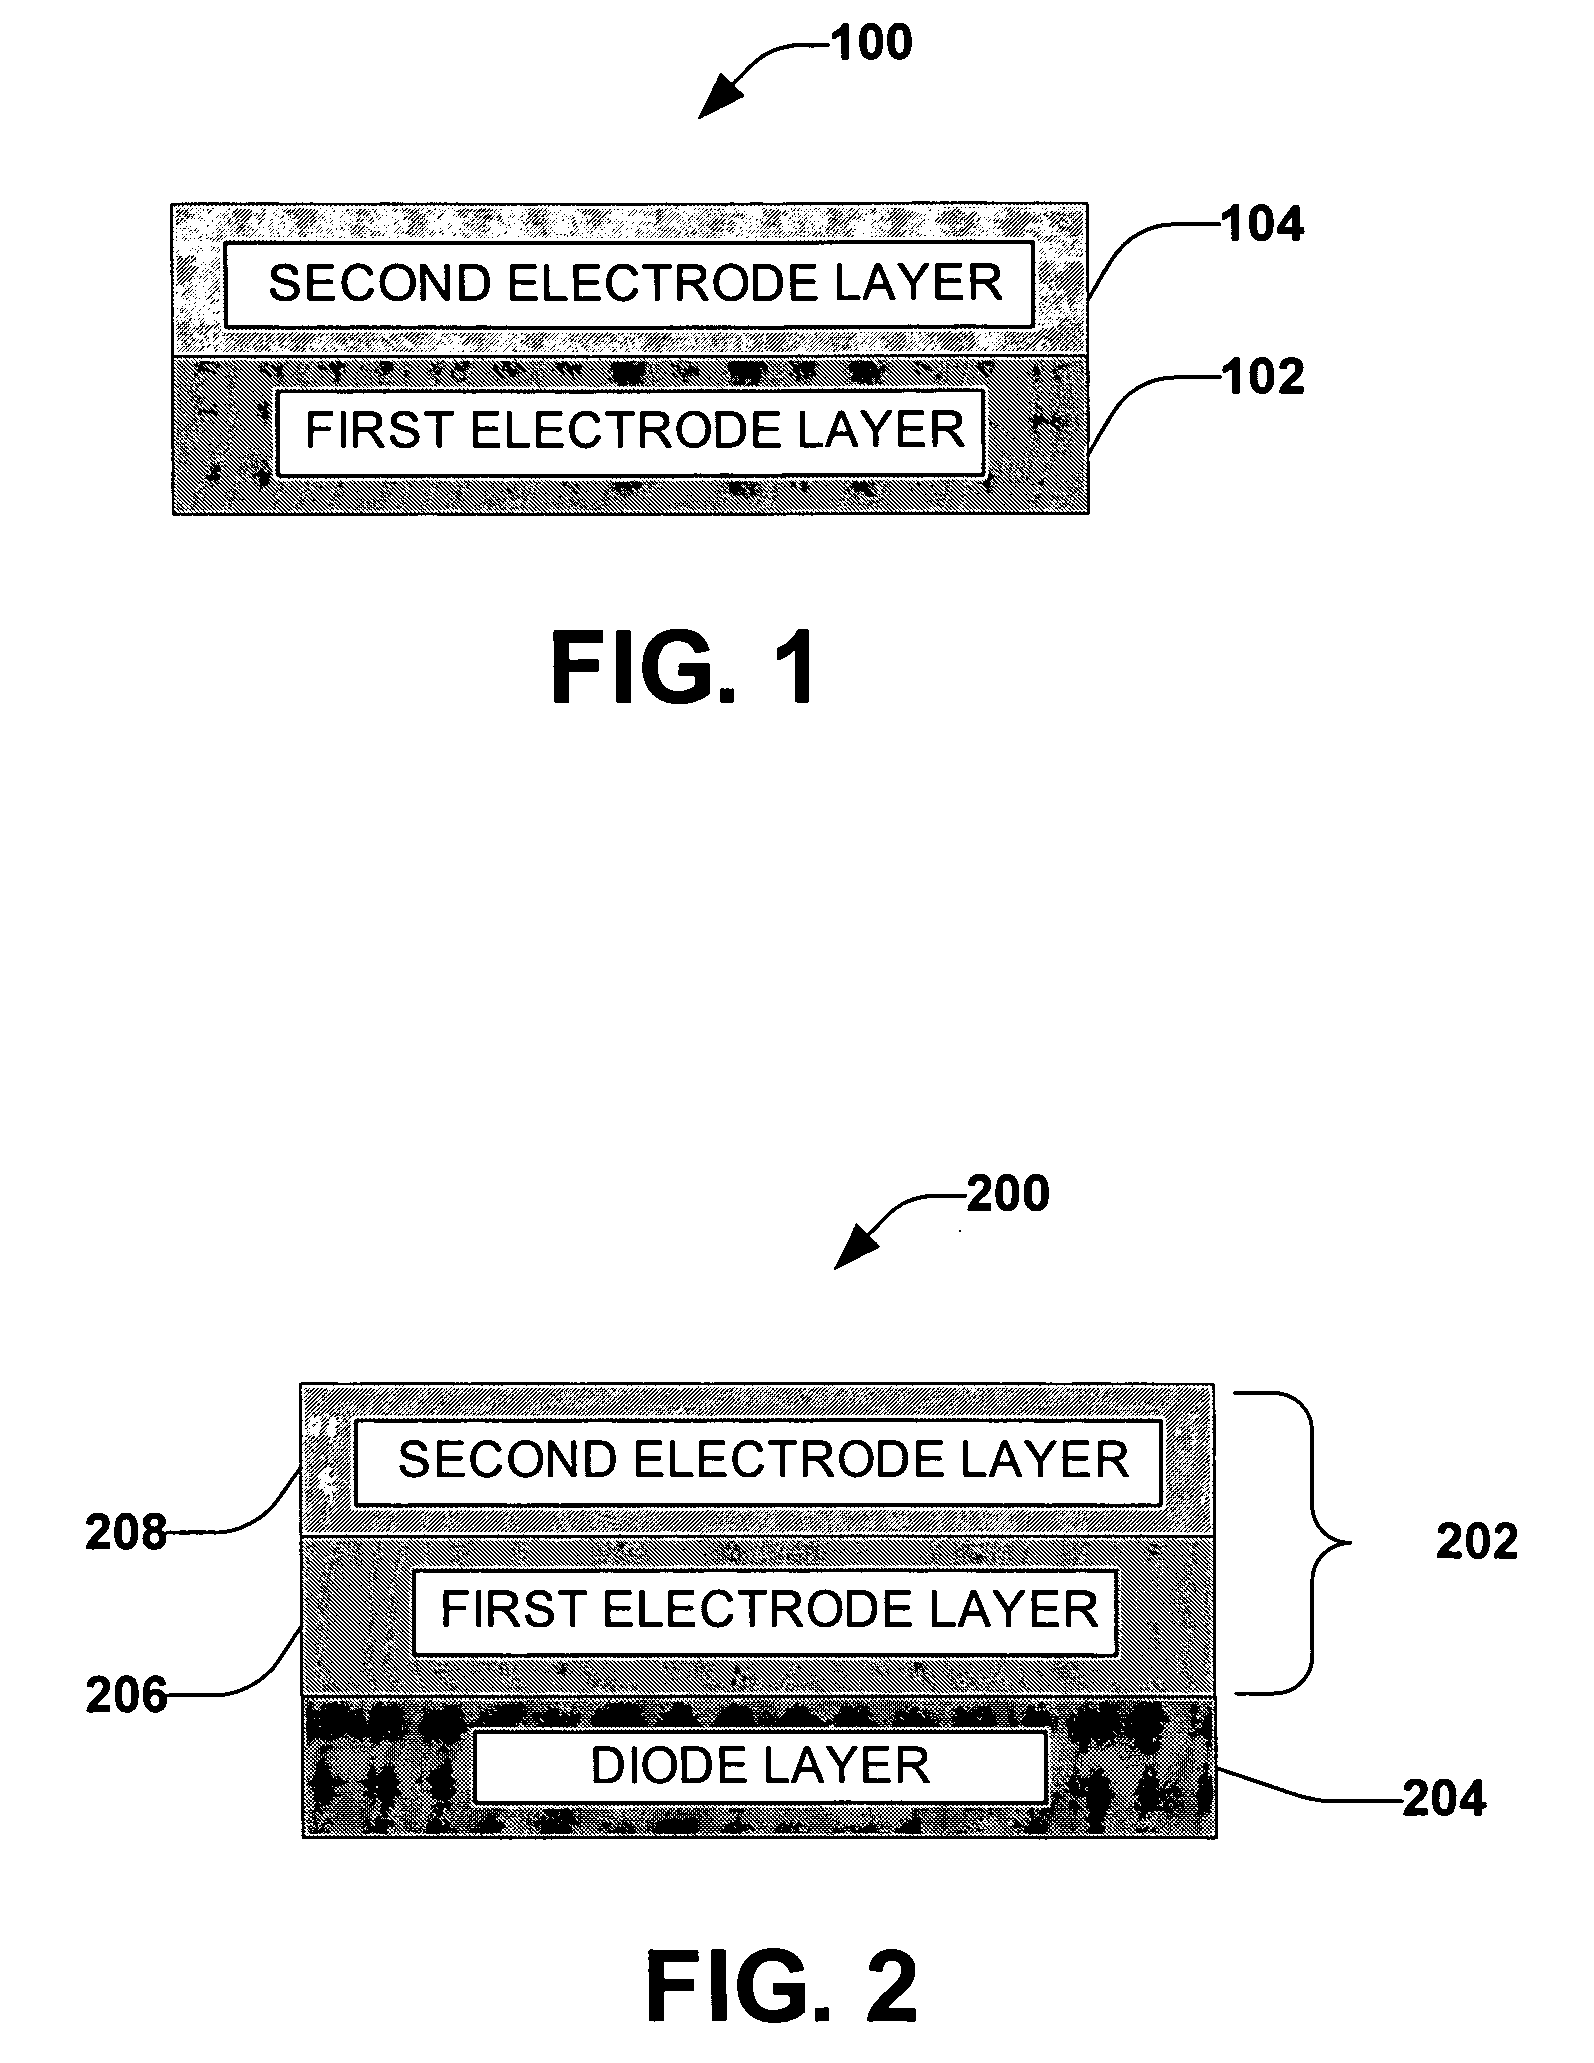 Semiconductor memory device comprising one or more injecting bilayer electrodes